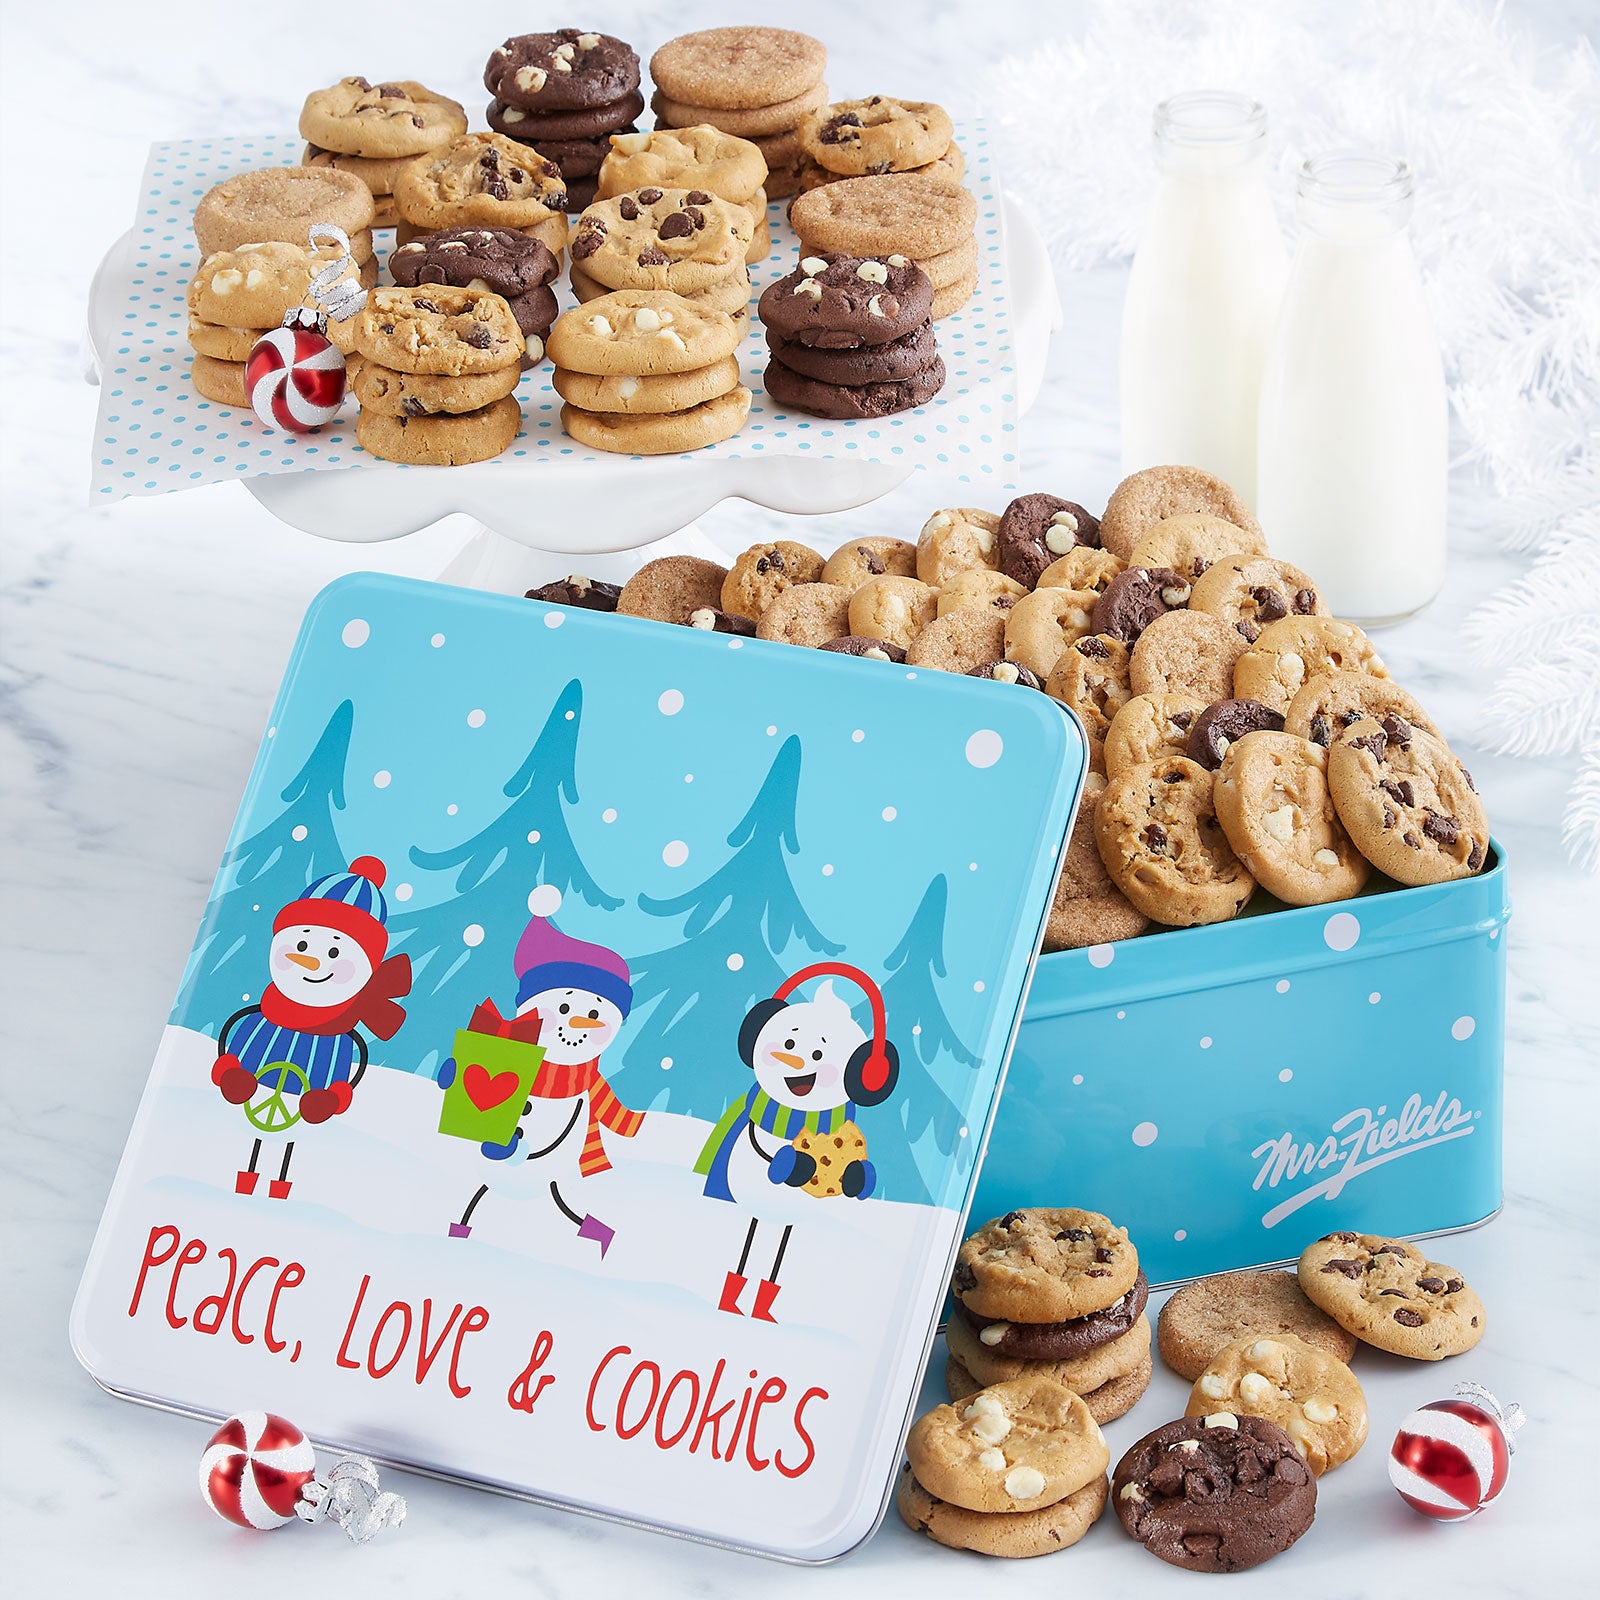 Peace, Love and Cookies sentiment on a gift tin with snowman friends as decorations. This tin is filled with an assortment of Nibblers®